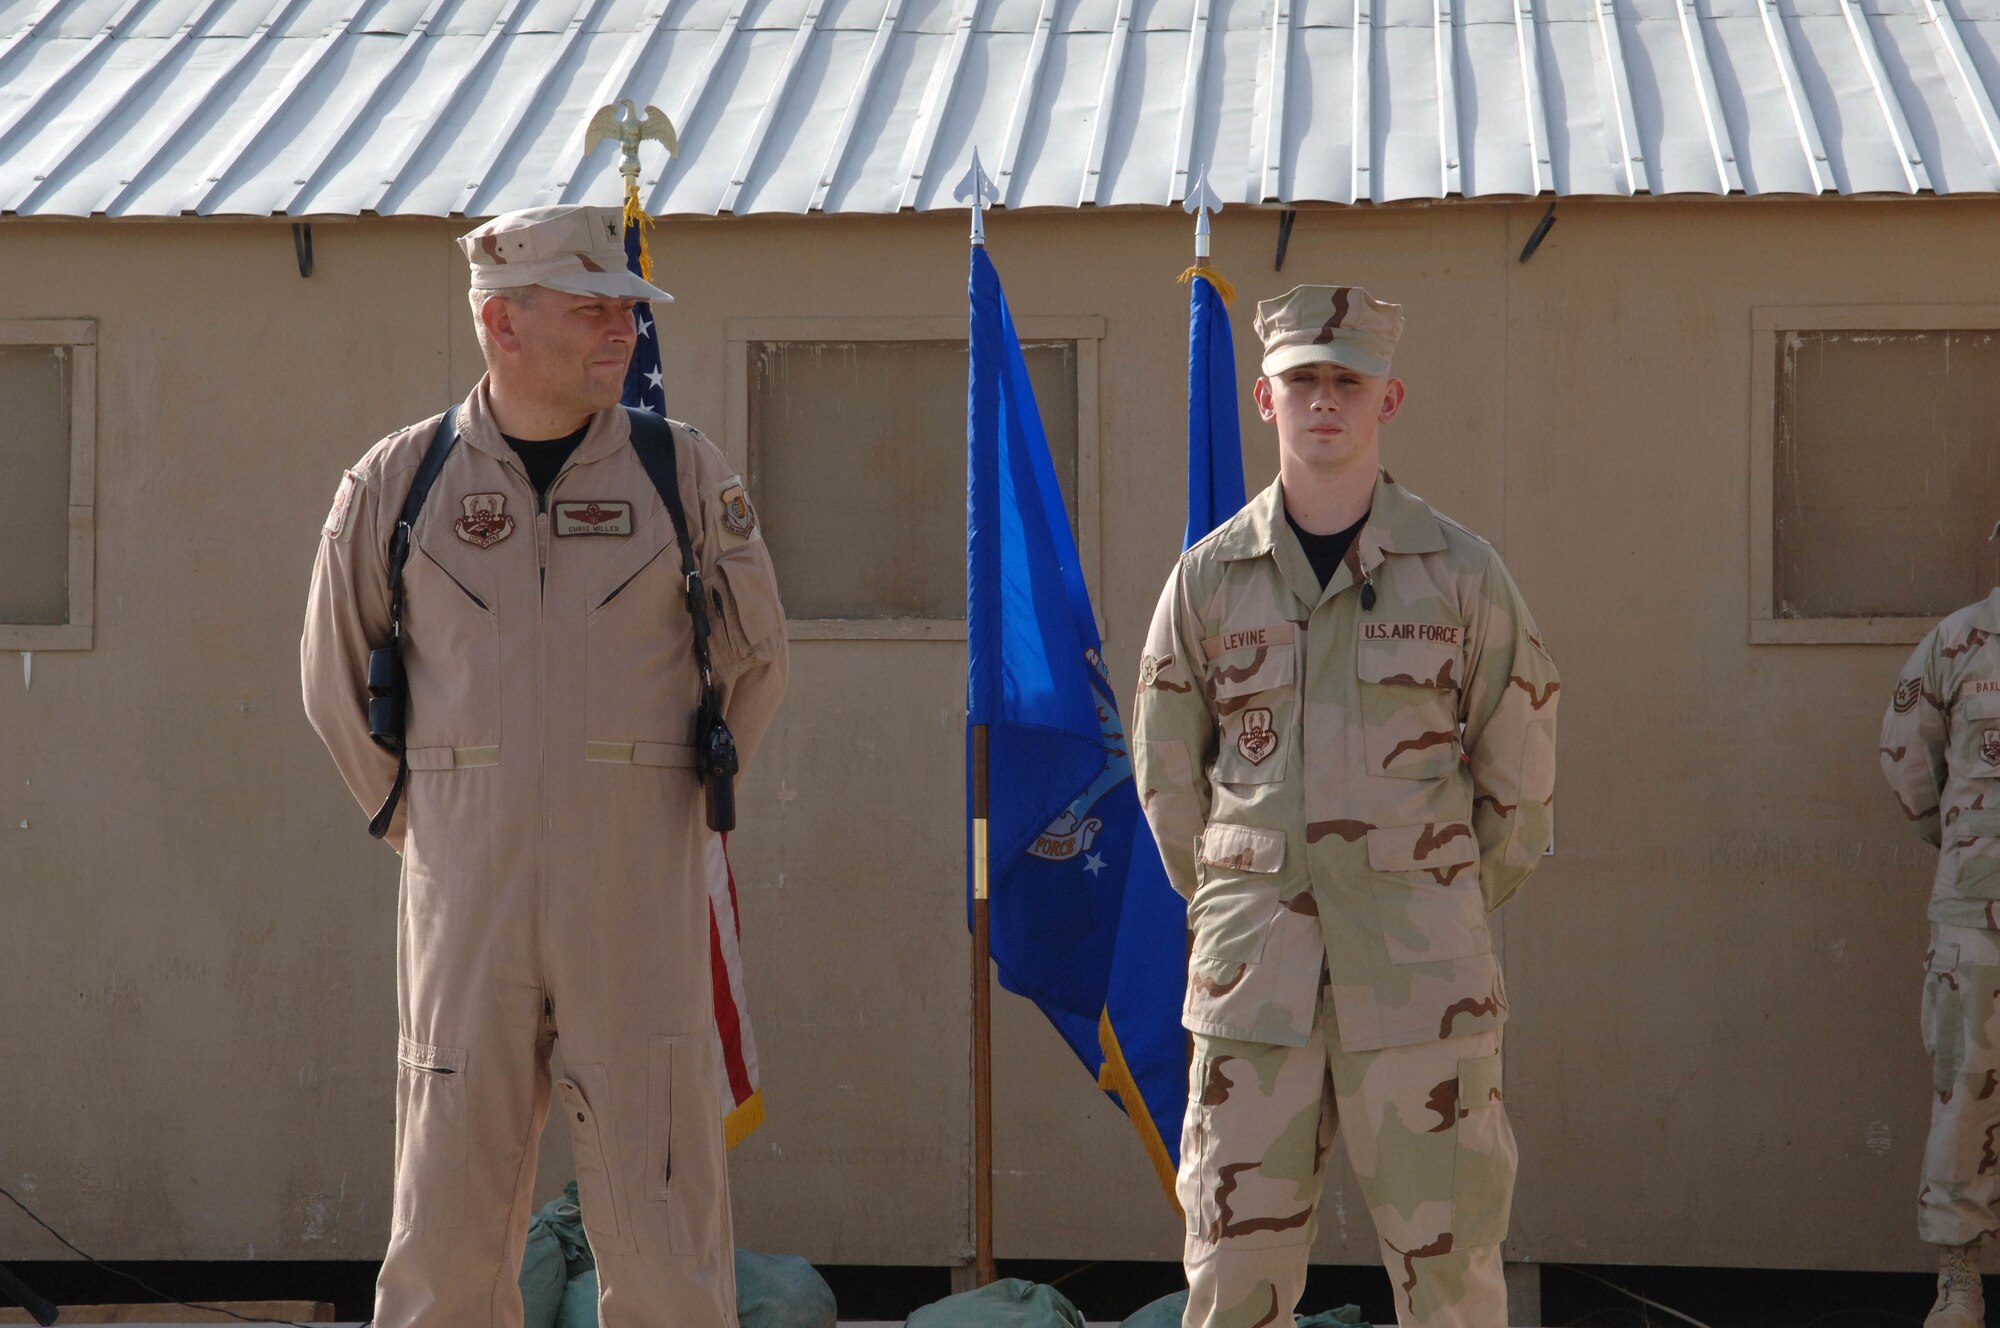 Brig. Gen. Christopher Miller, 455th Air Expeditionary Wing commander, and Airman Nicholas Levine, a crew chief with the 455th Expeditionary Maintenance Squadron, represent the most senior officer and the youngest airman in the wing.  The Air Force tradition of highlighting these two people is used to represent both ends of the spectrum and fullness of the service on its birthday.